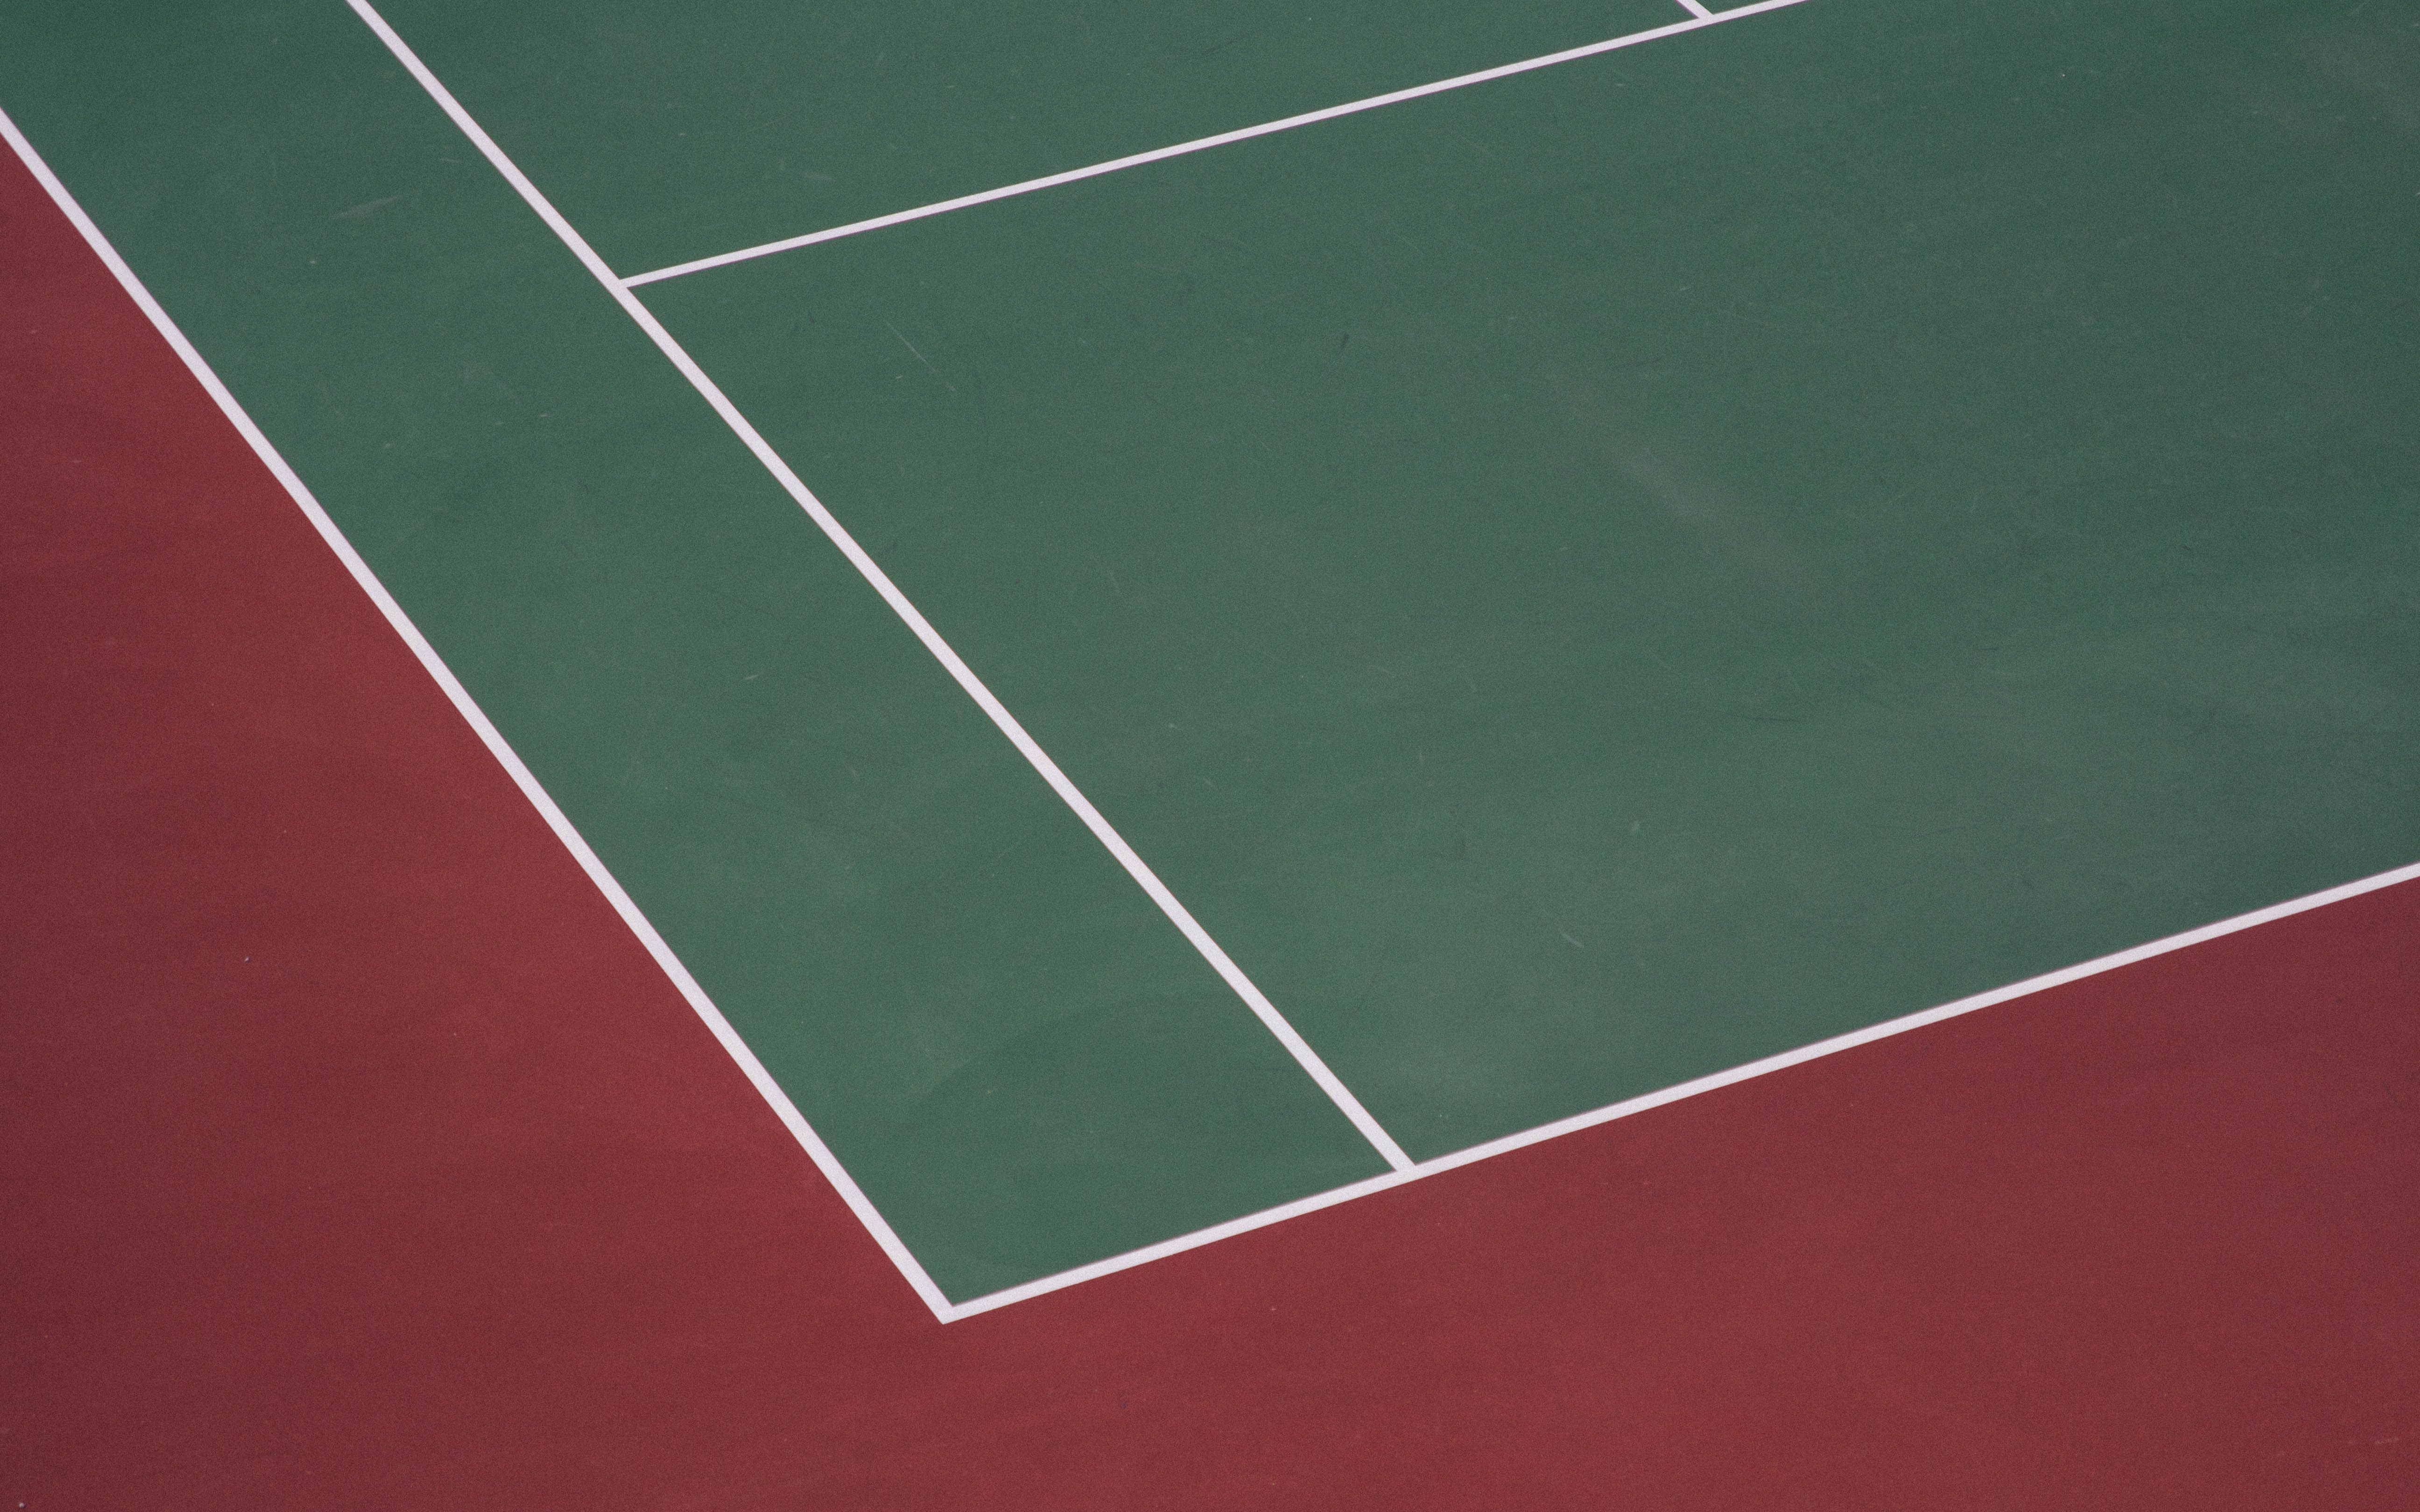 5184x3240 sport, line, tennis court, sports background, square, tenni, wallpaper, Creative Commons image, red, green, play, court, leisure, activity, sports wallpaper Gallery HD Wallpaper